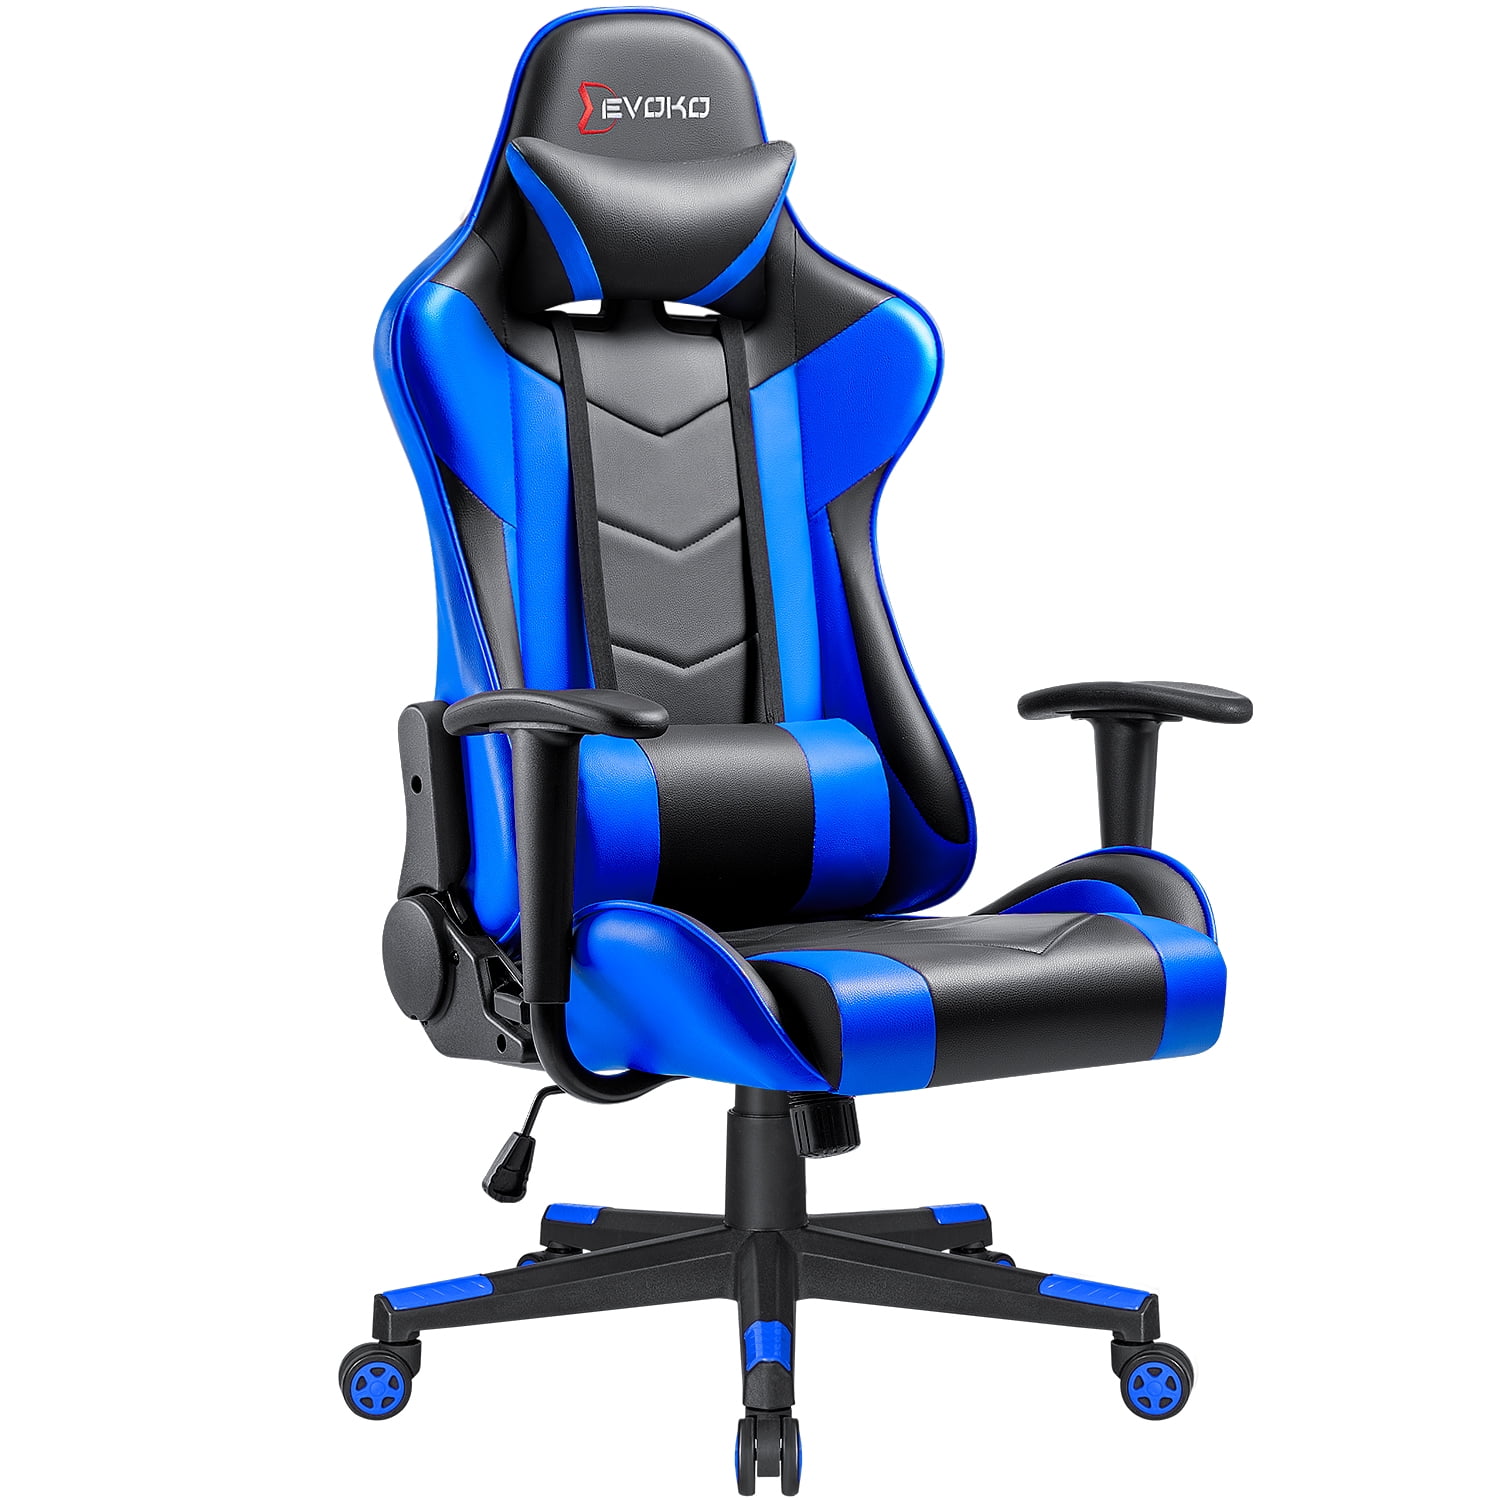 Devoko Ergonomic Gaming Chair Racing Style Adjustable Height High Back PC Computer Chair with Headrest and Lumbar Support, Blue